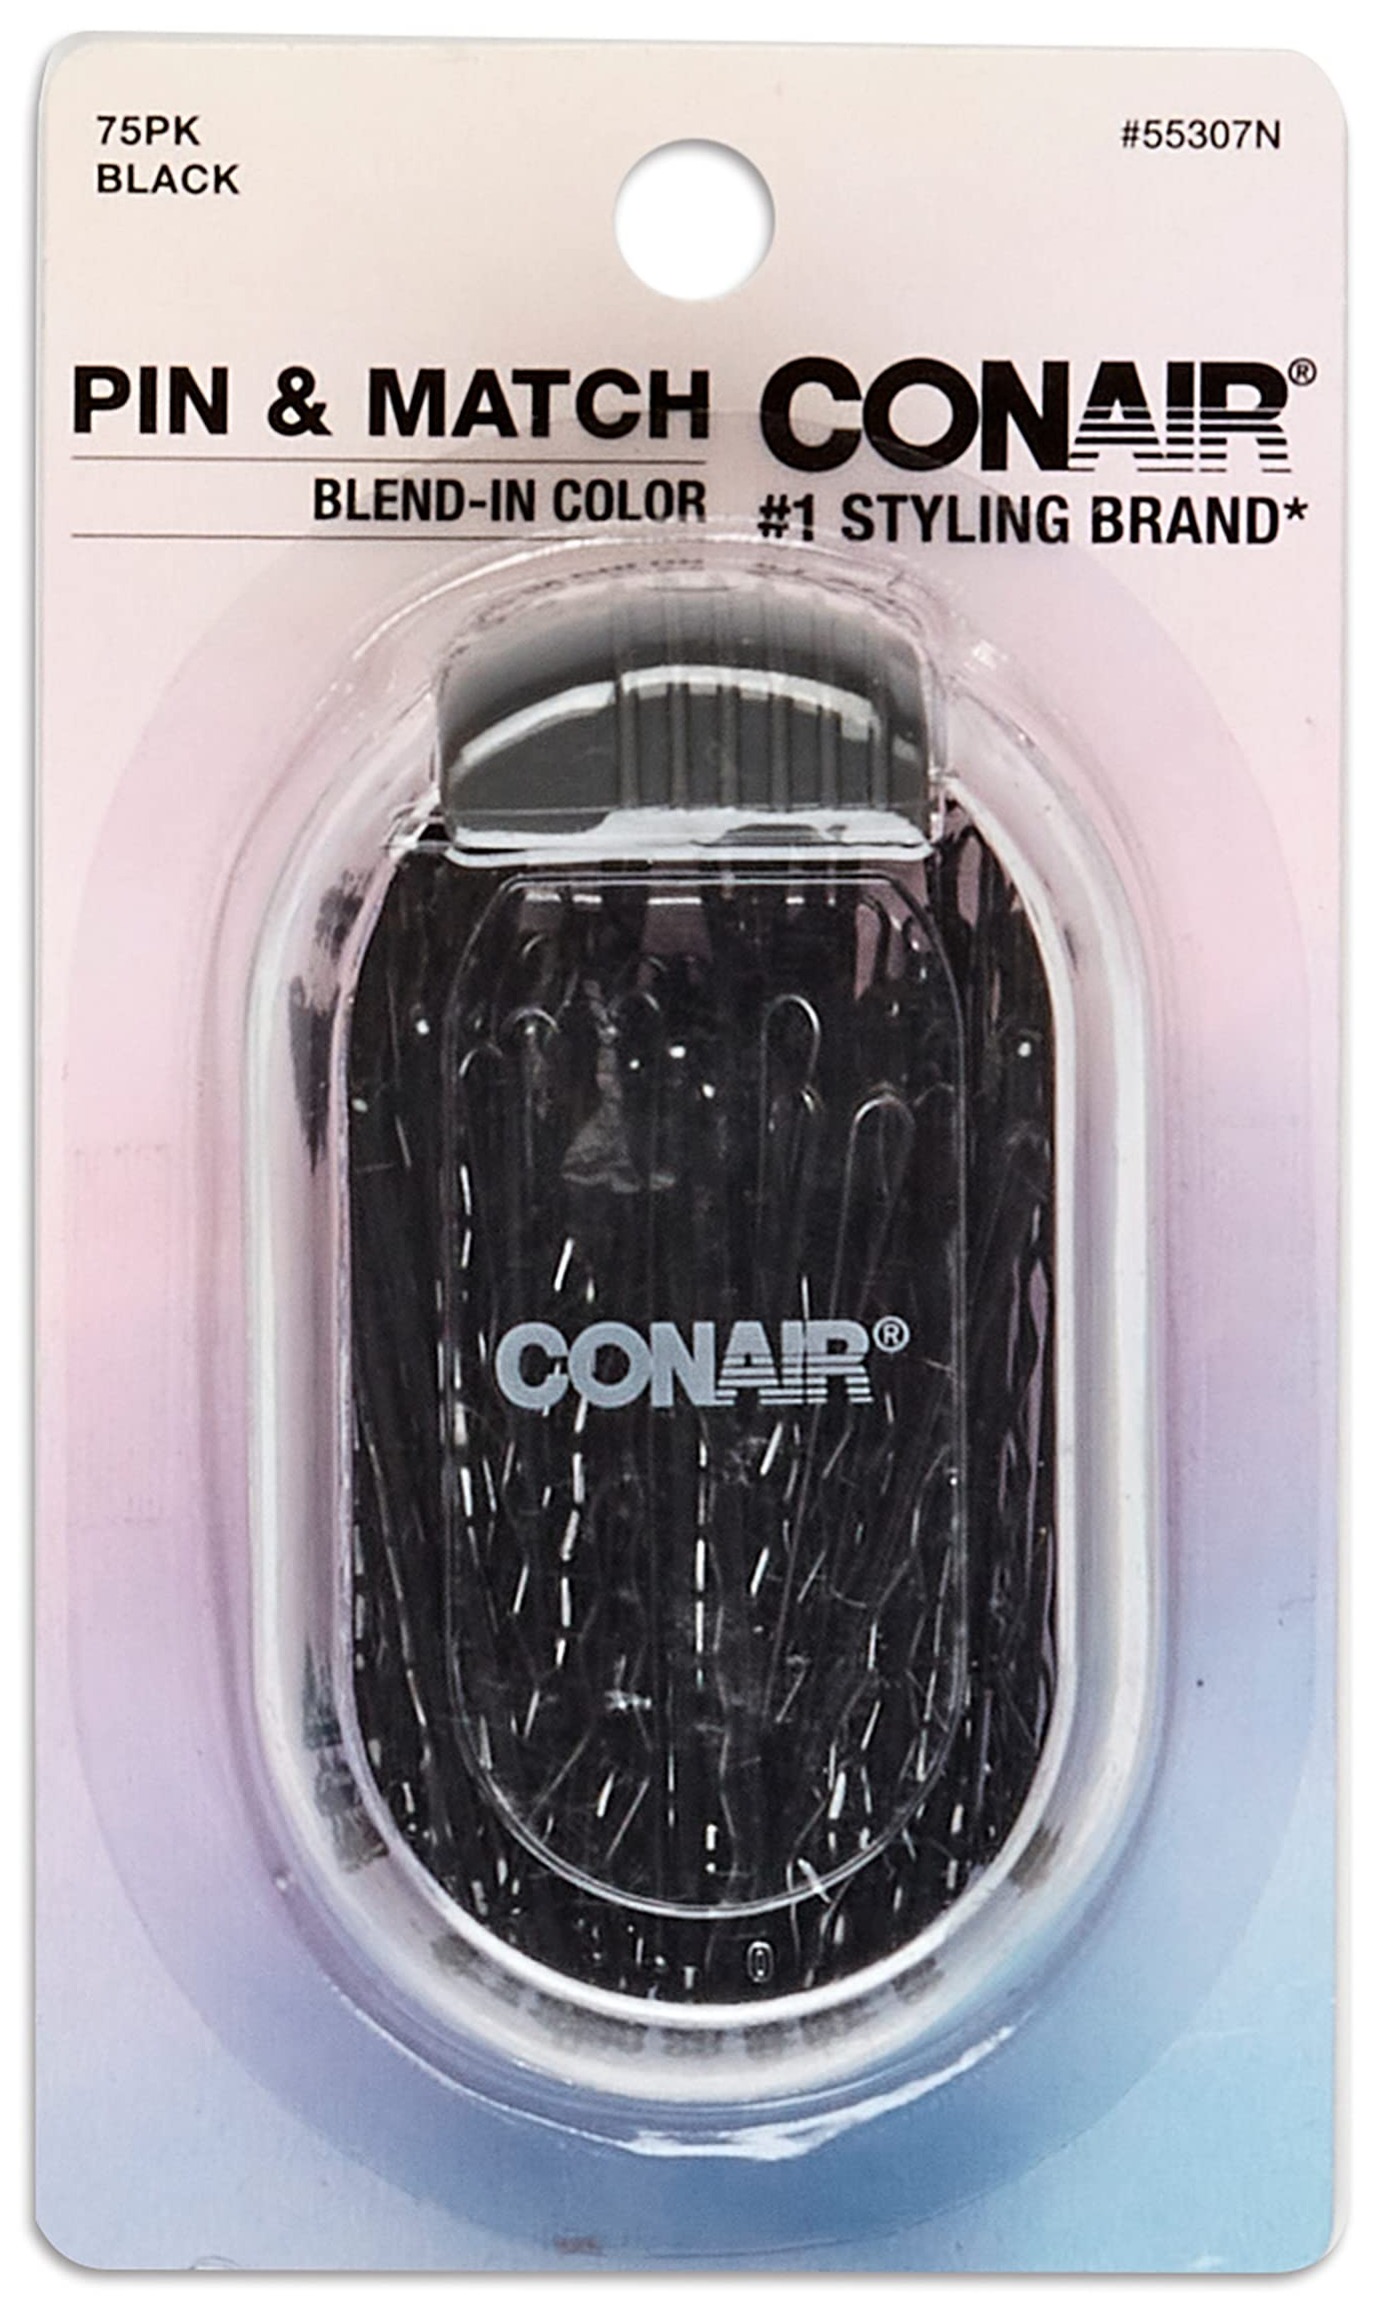 75-Count Conair Pin & Match Bobby Hair Pins w/ Storage Container 2 for $5.70 + Free Shipping w/ Prime or on $25+